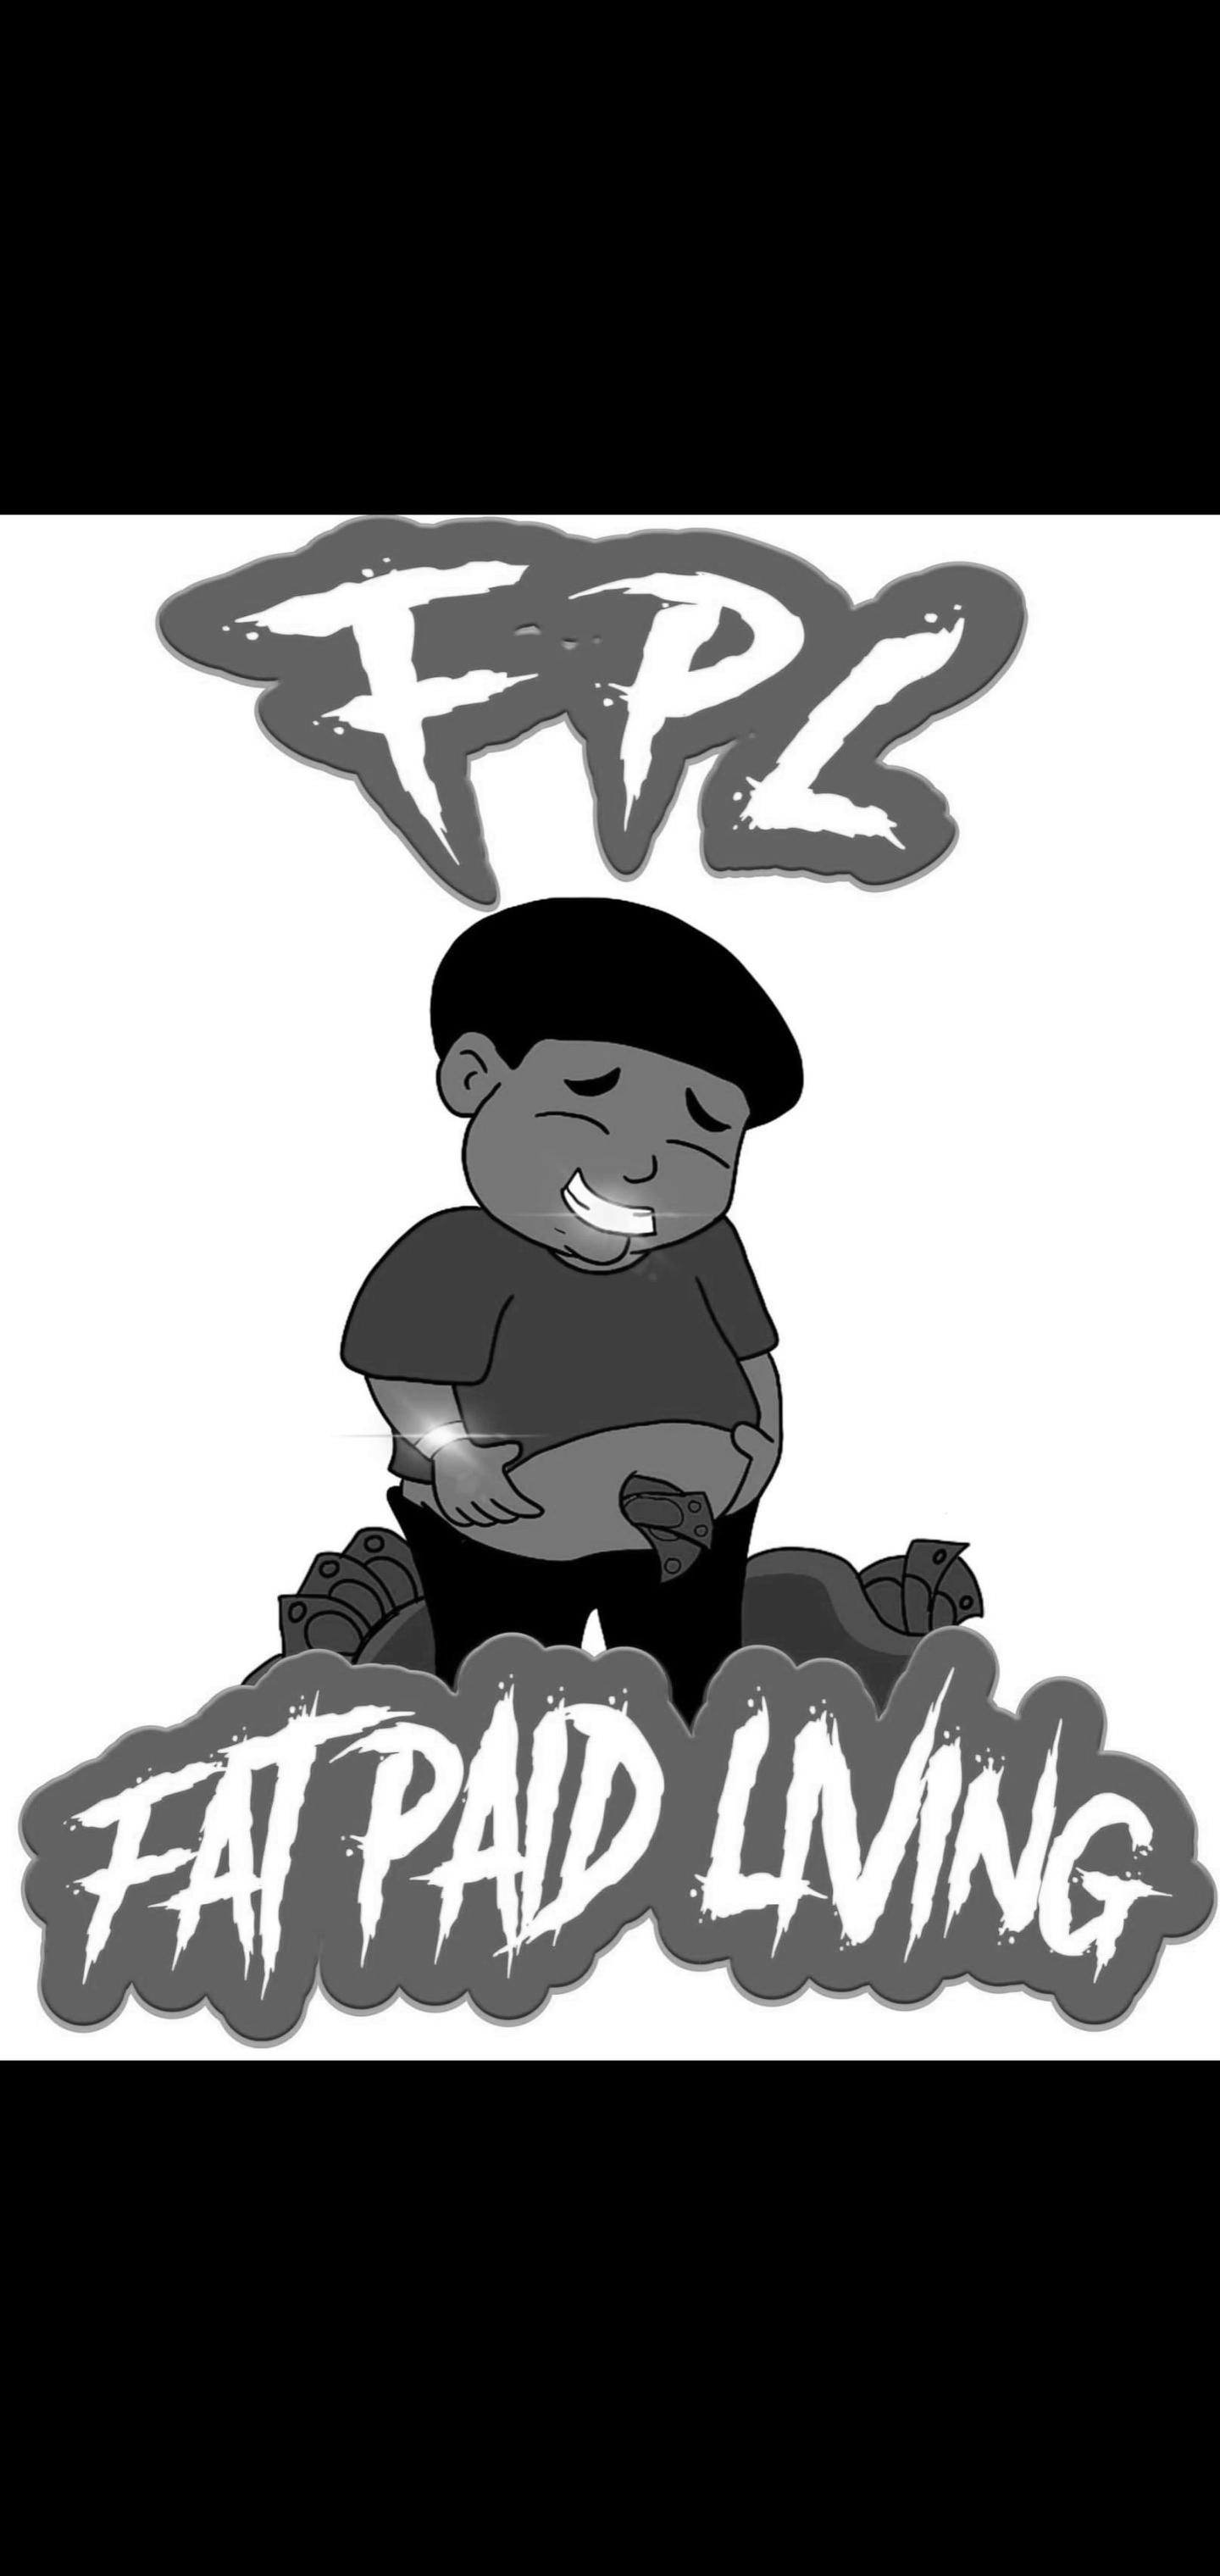  FPL. FAT PAID LIVING